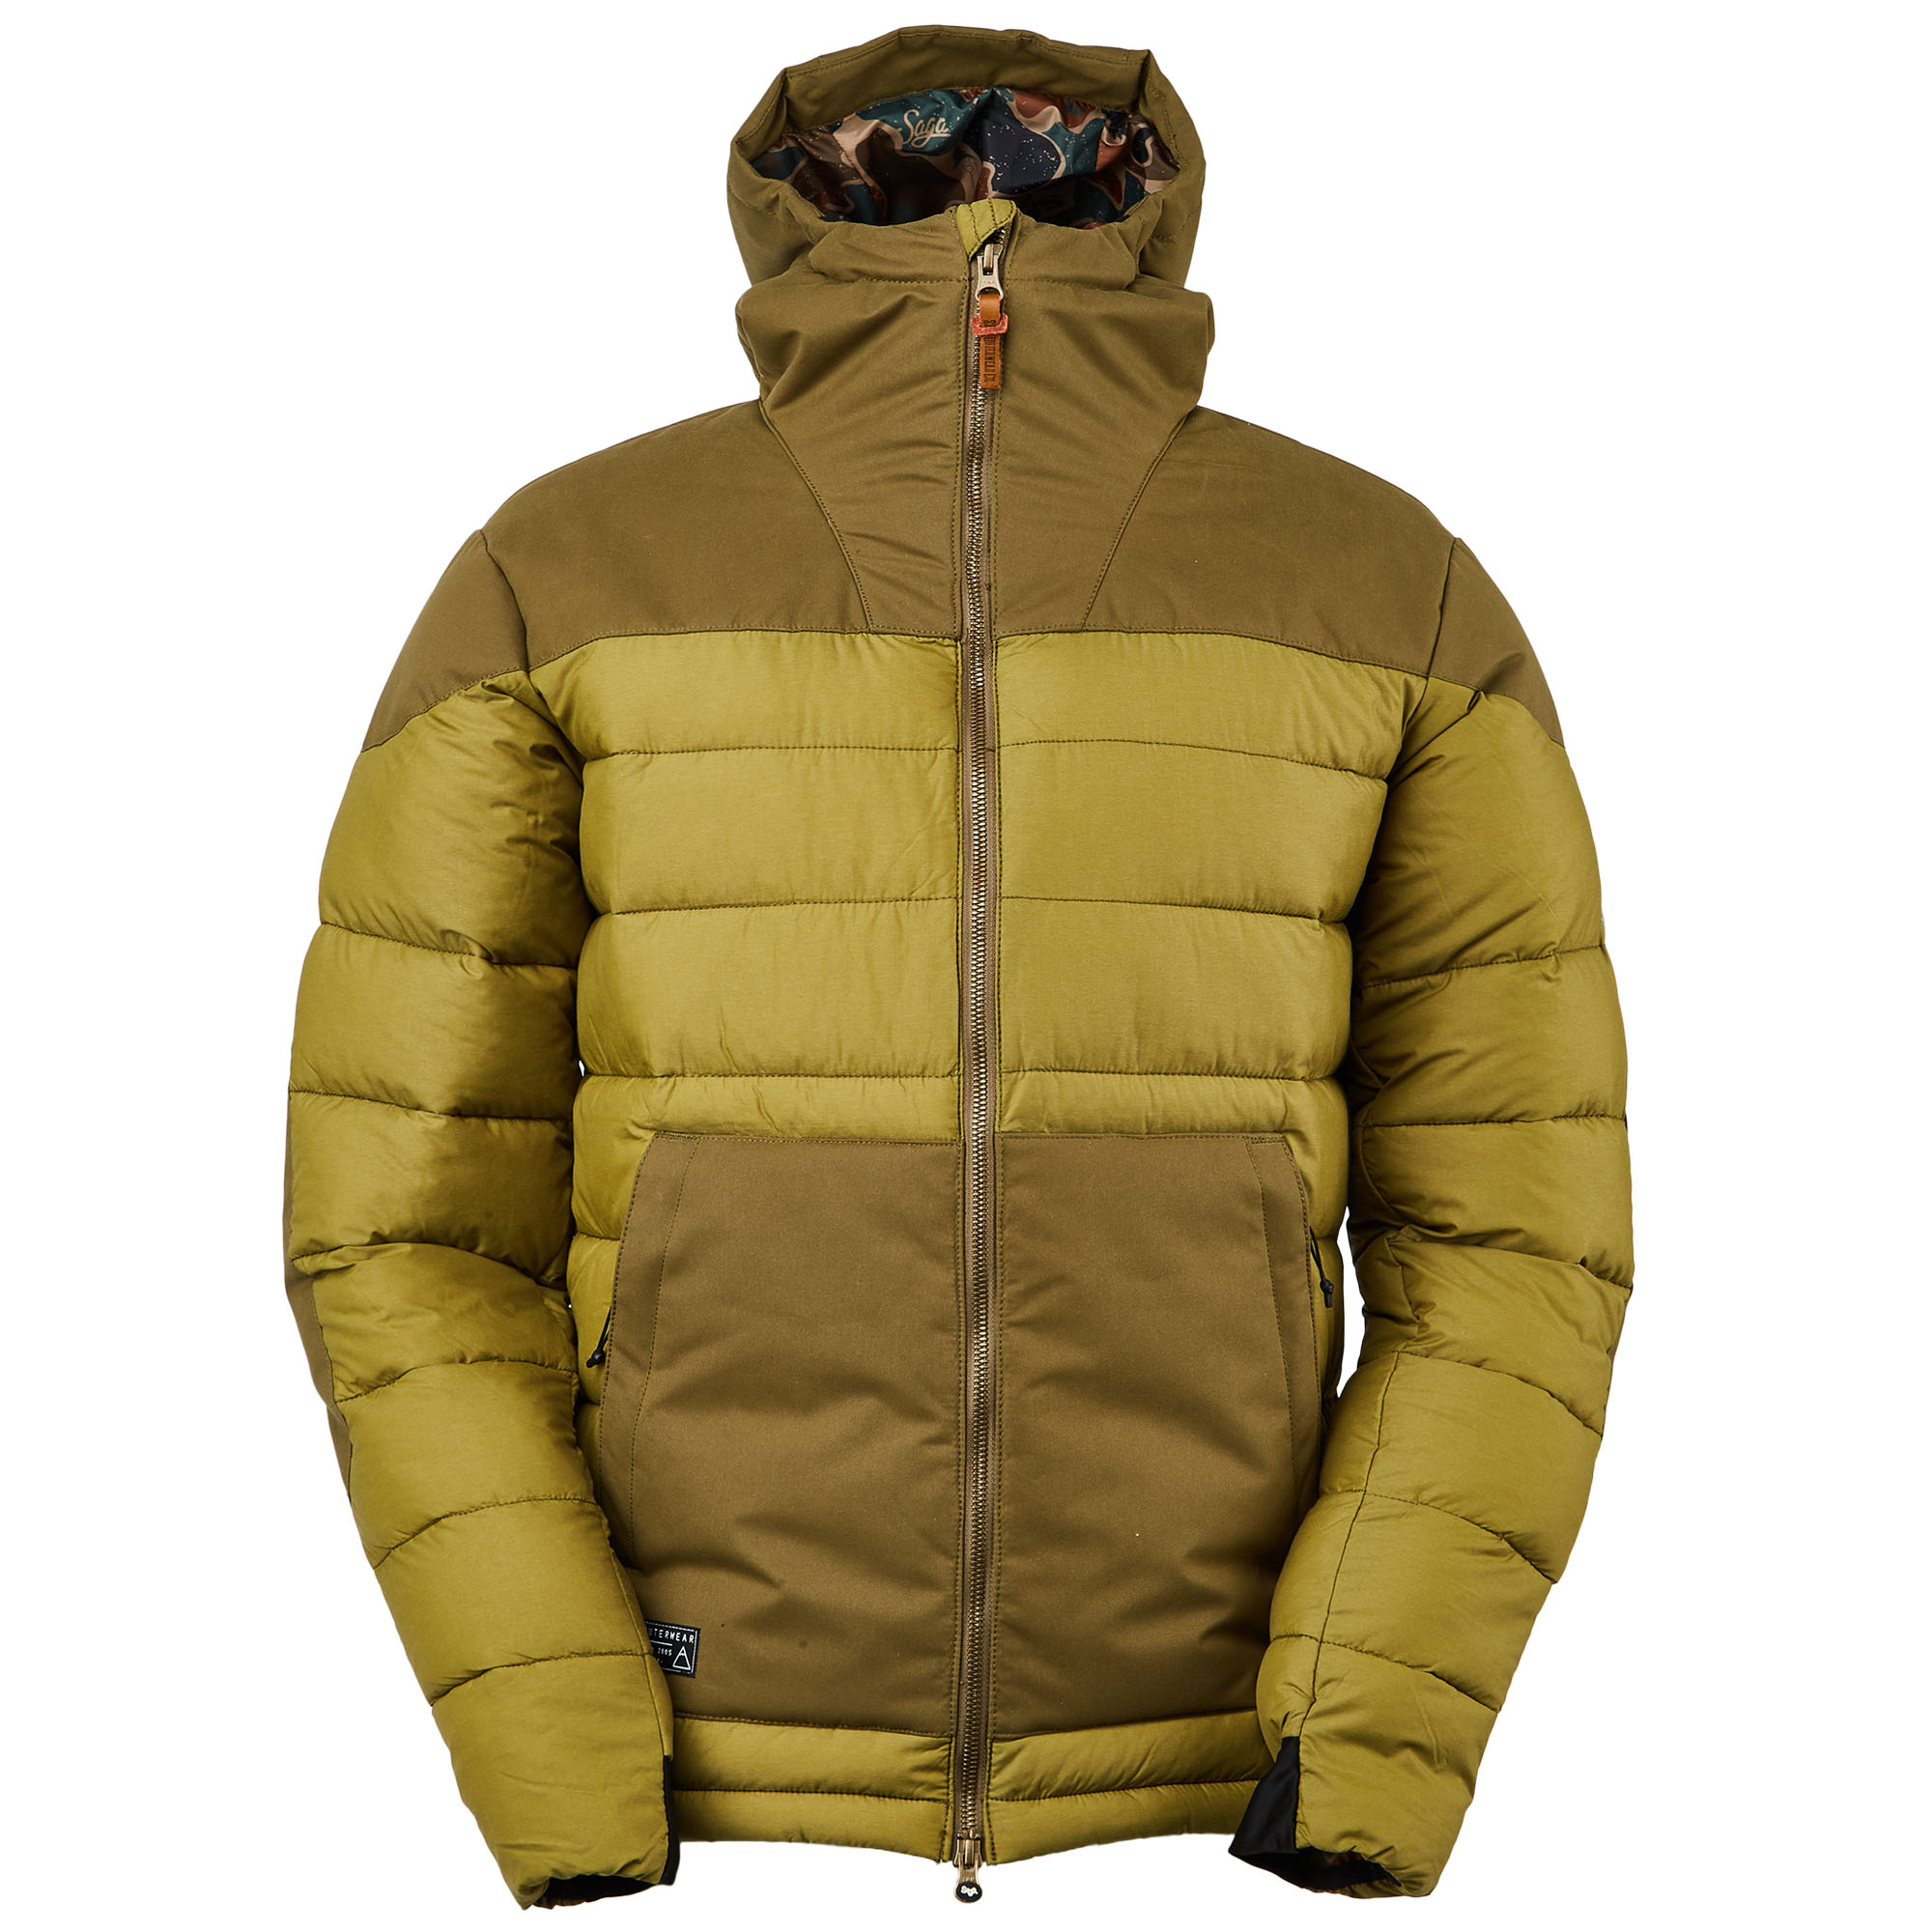 Patagonia Men's 3-in-1 Snowshot Jacket Review: Ski in All Conditions